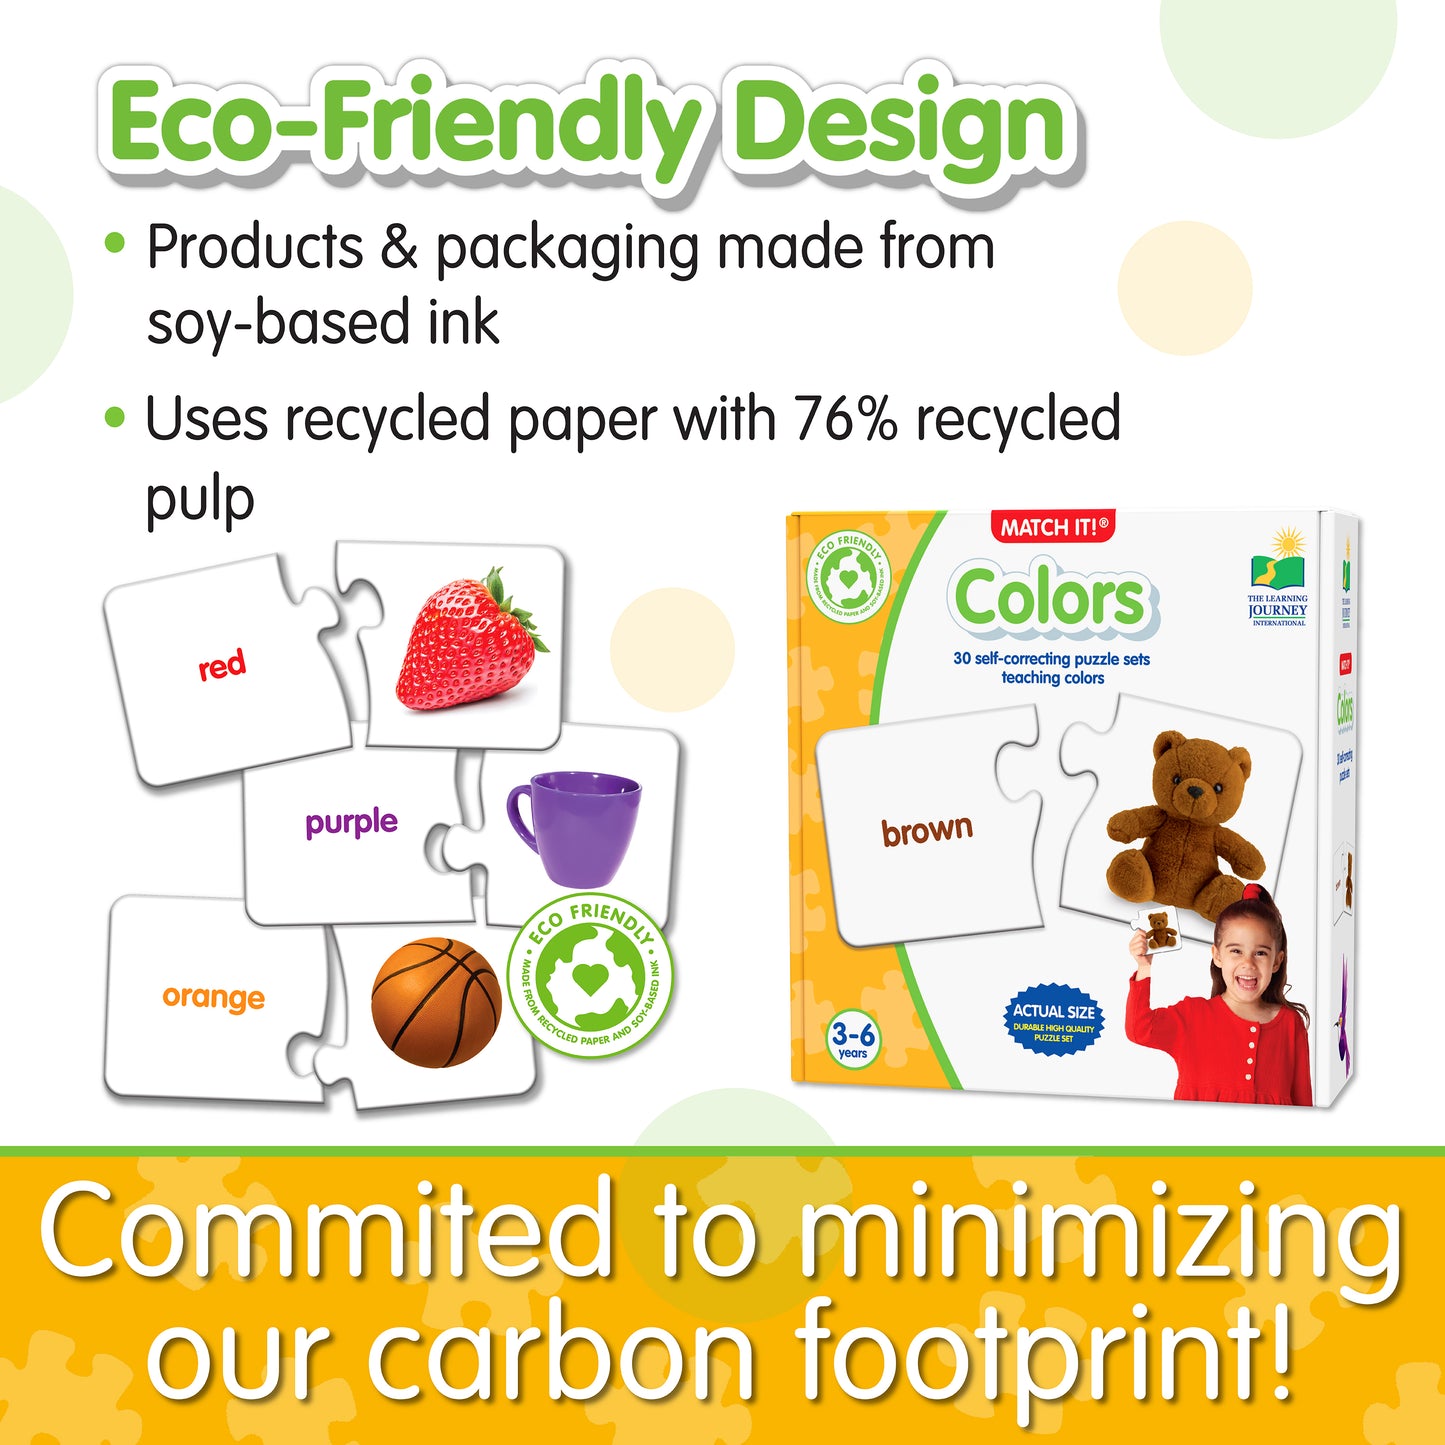 Infographic about Match It - Colors' eco-friendly design that says, "Committed to minimizing our carbon footprint!" 